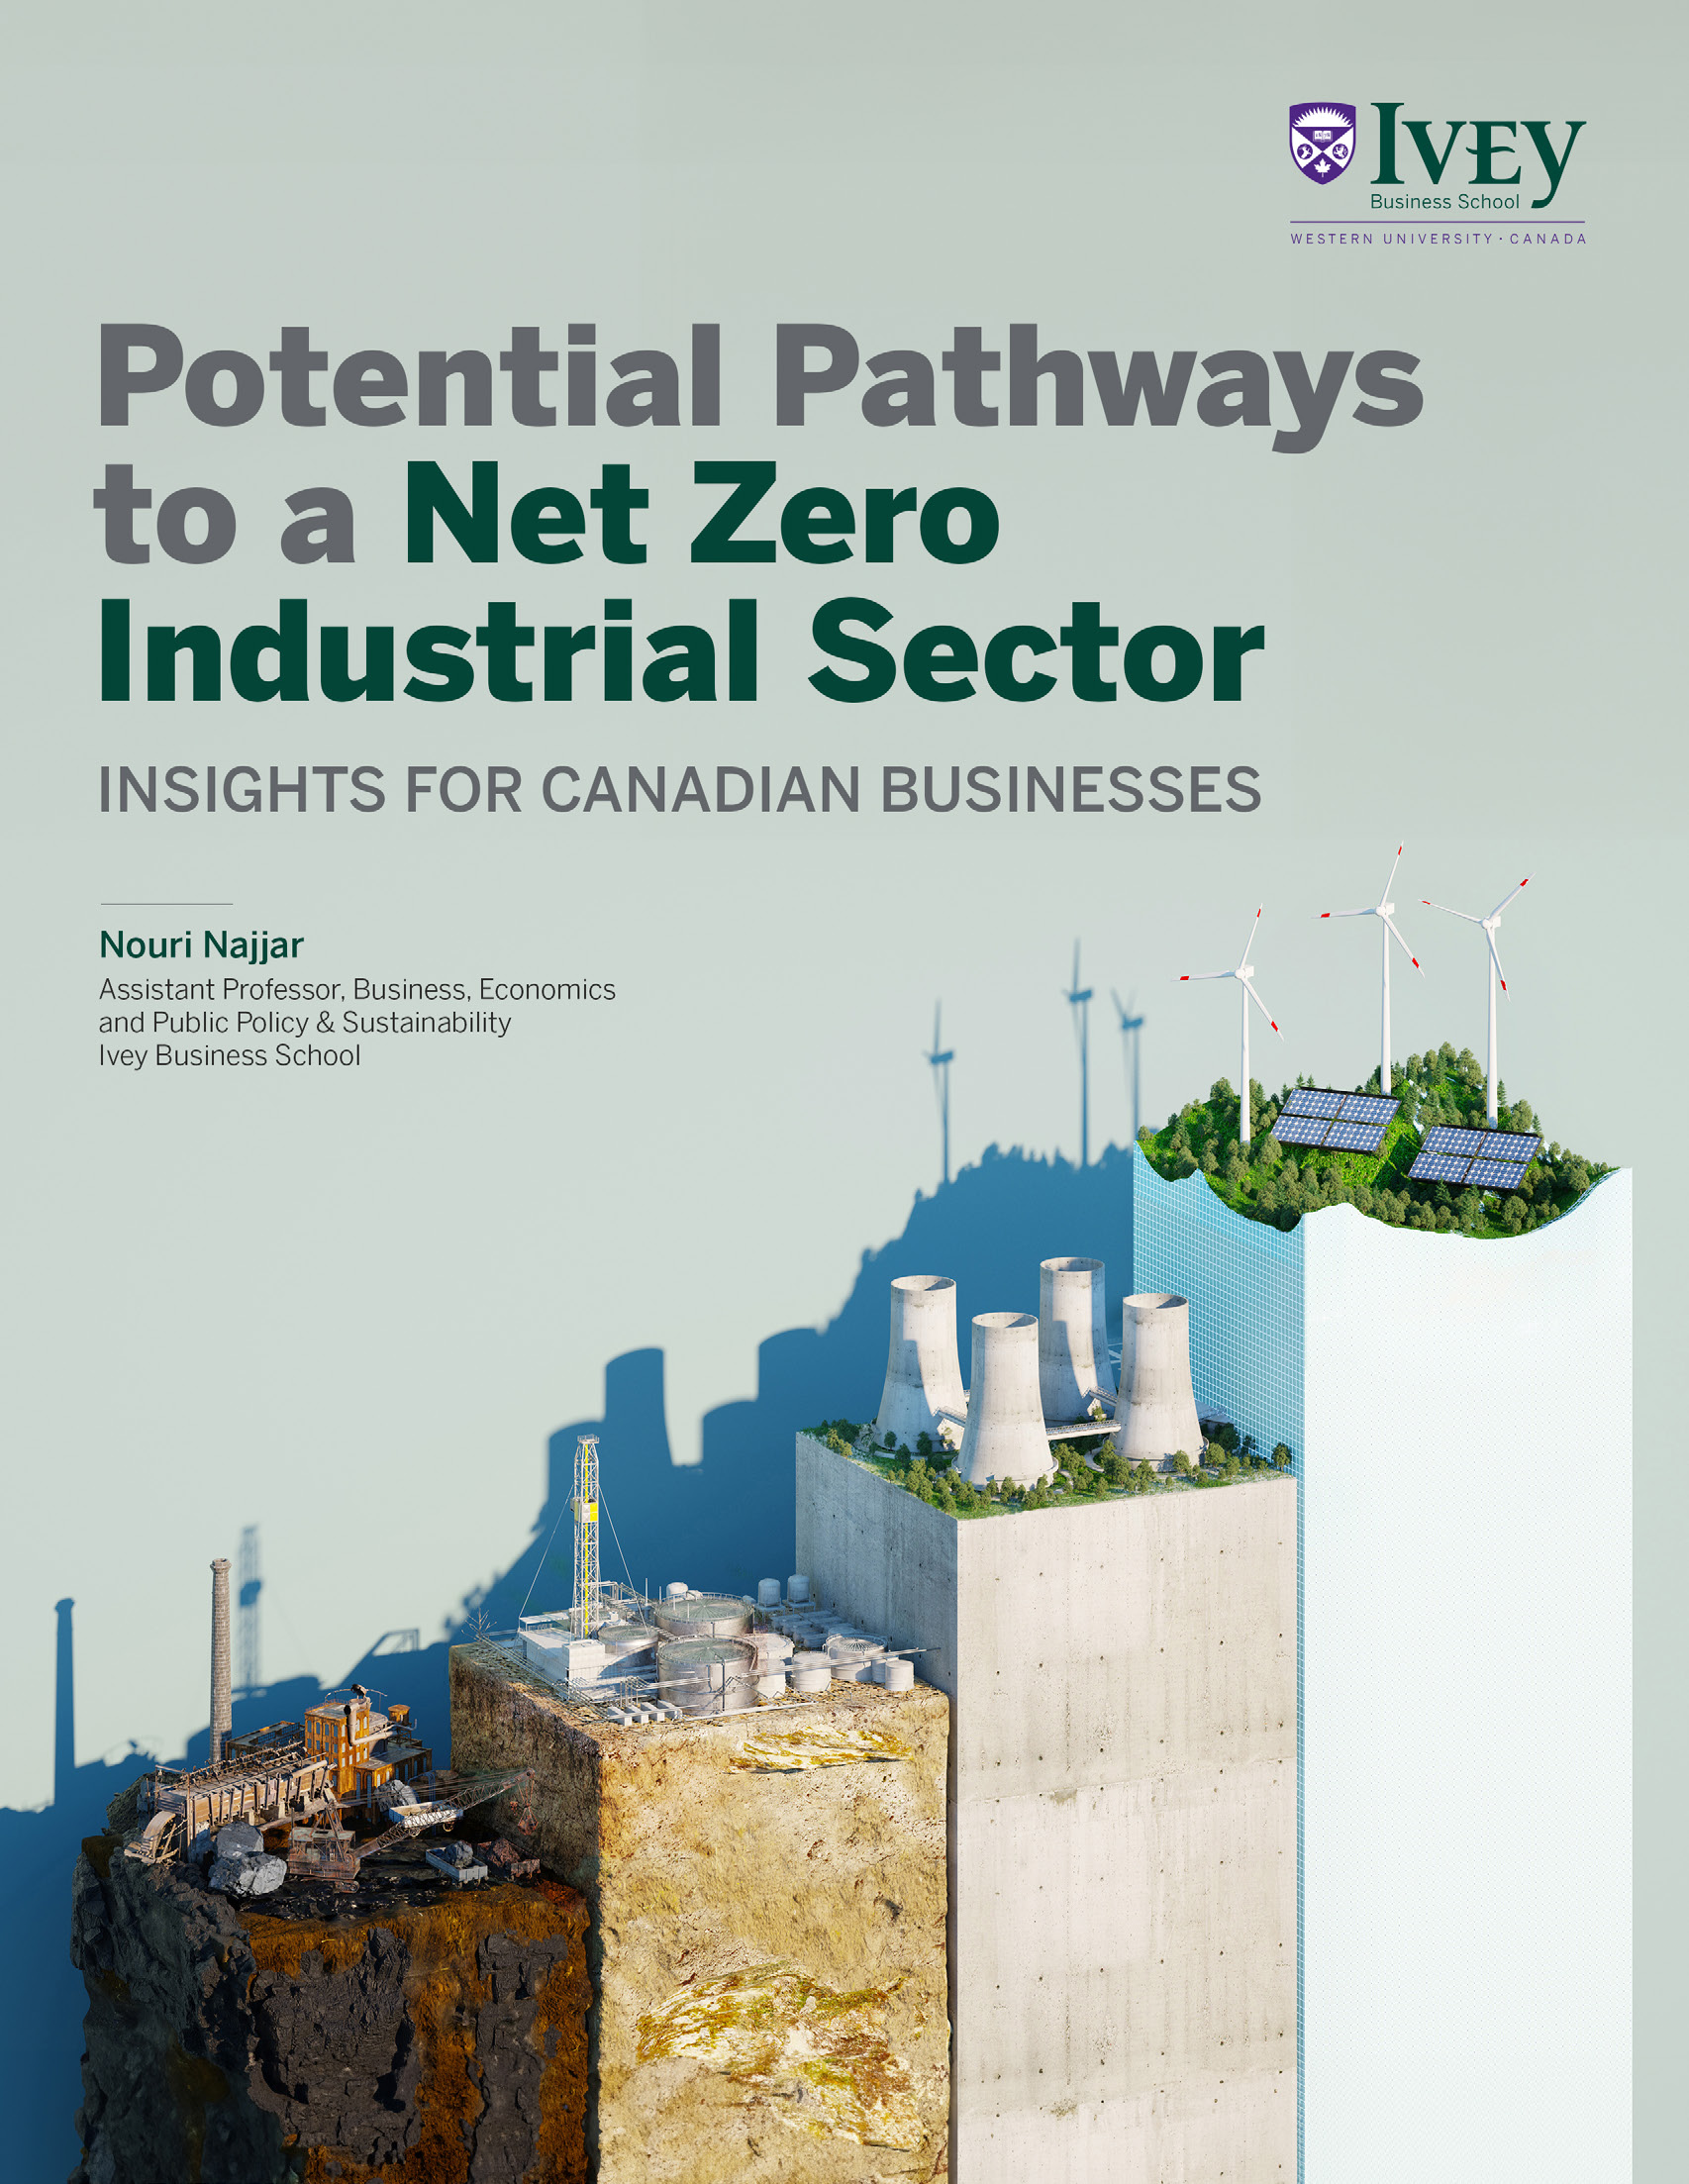 Potential Pathways to a Net Zero Industrial Sector